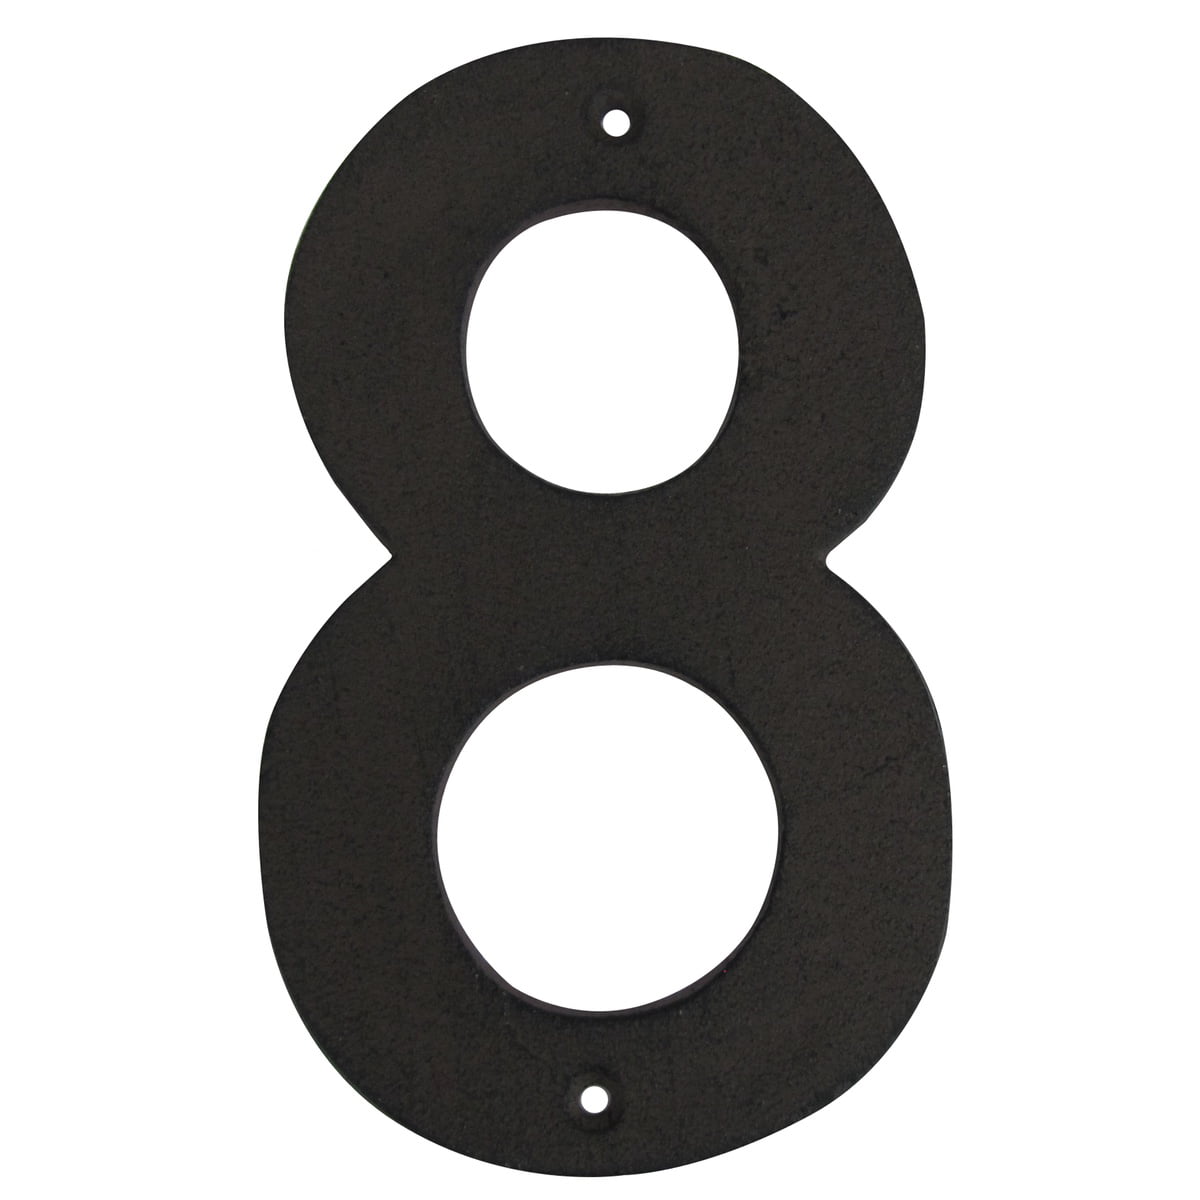 Rustic BROWN Cast Iron Metal House Numbers Street Address # Phone Number 7 SEVEN 